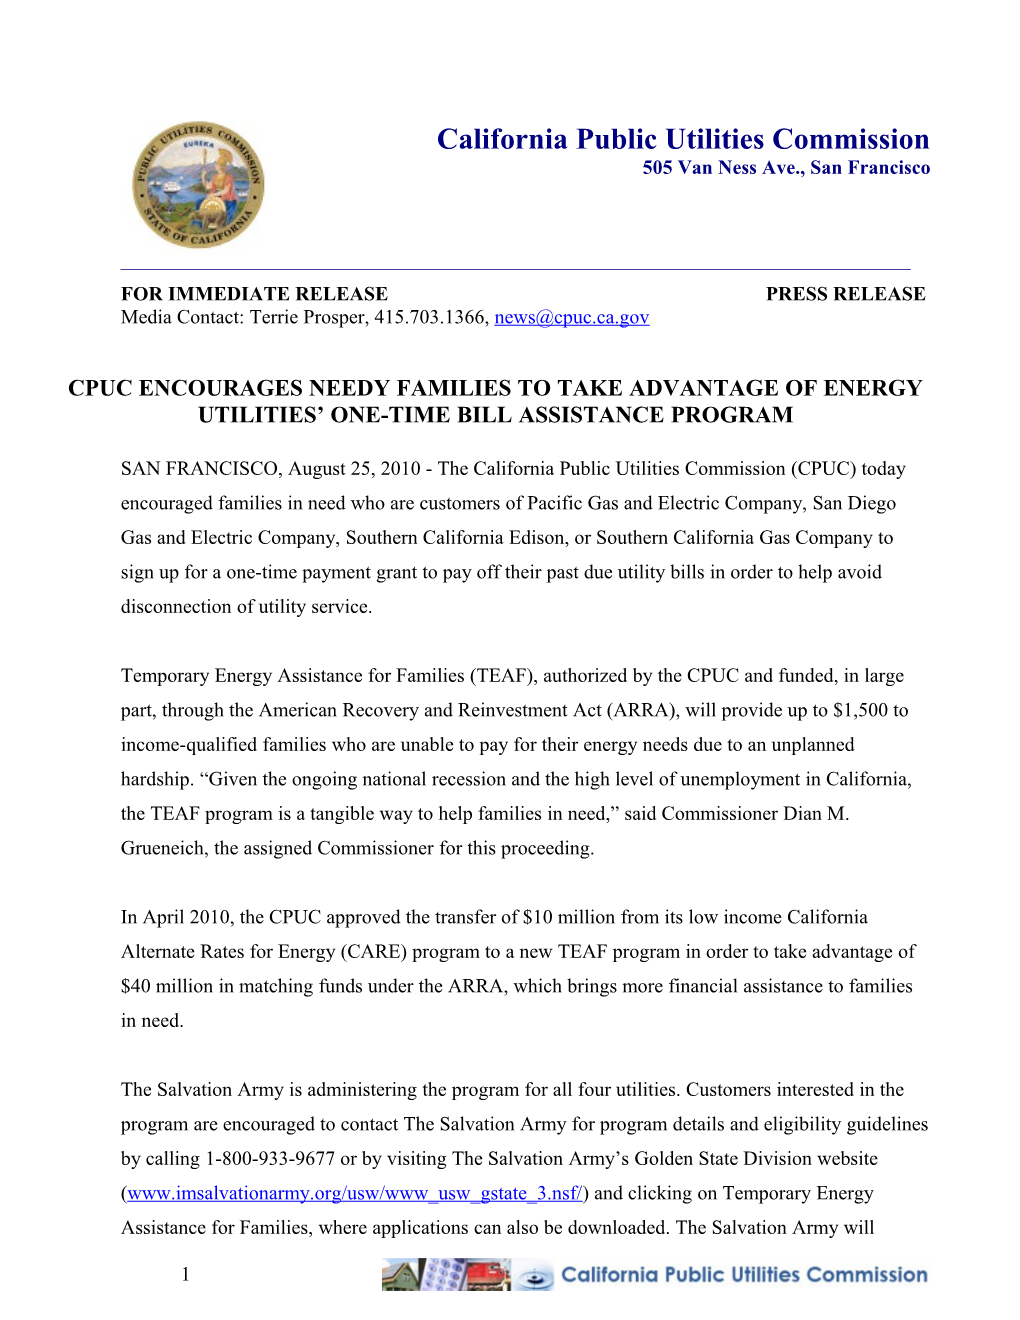 Cpuc Encourages Needy Families to Take Advantage of Energy Utilities One-Time Bill Assistance